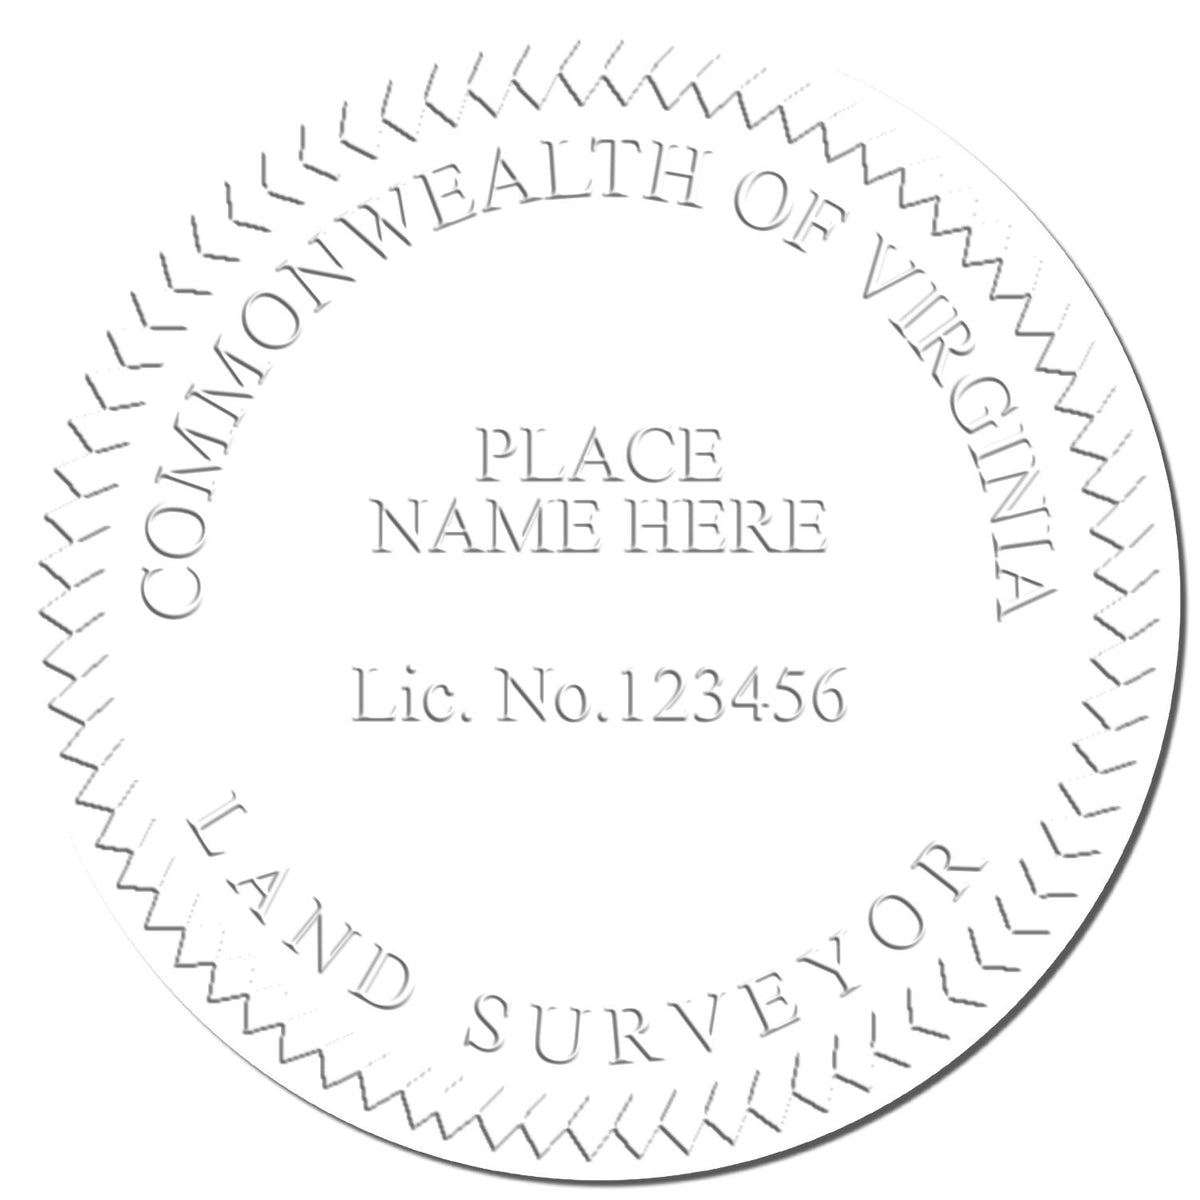 This paper is stamped with a sample imprint of the State of Virginia Soft Land Surveyor Embossing Seal, signifying its quality and reliability.